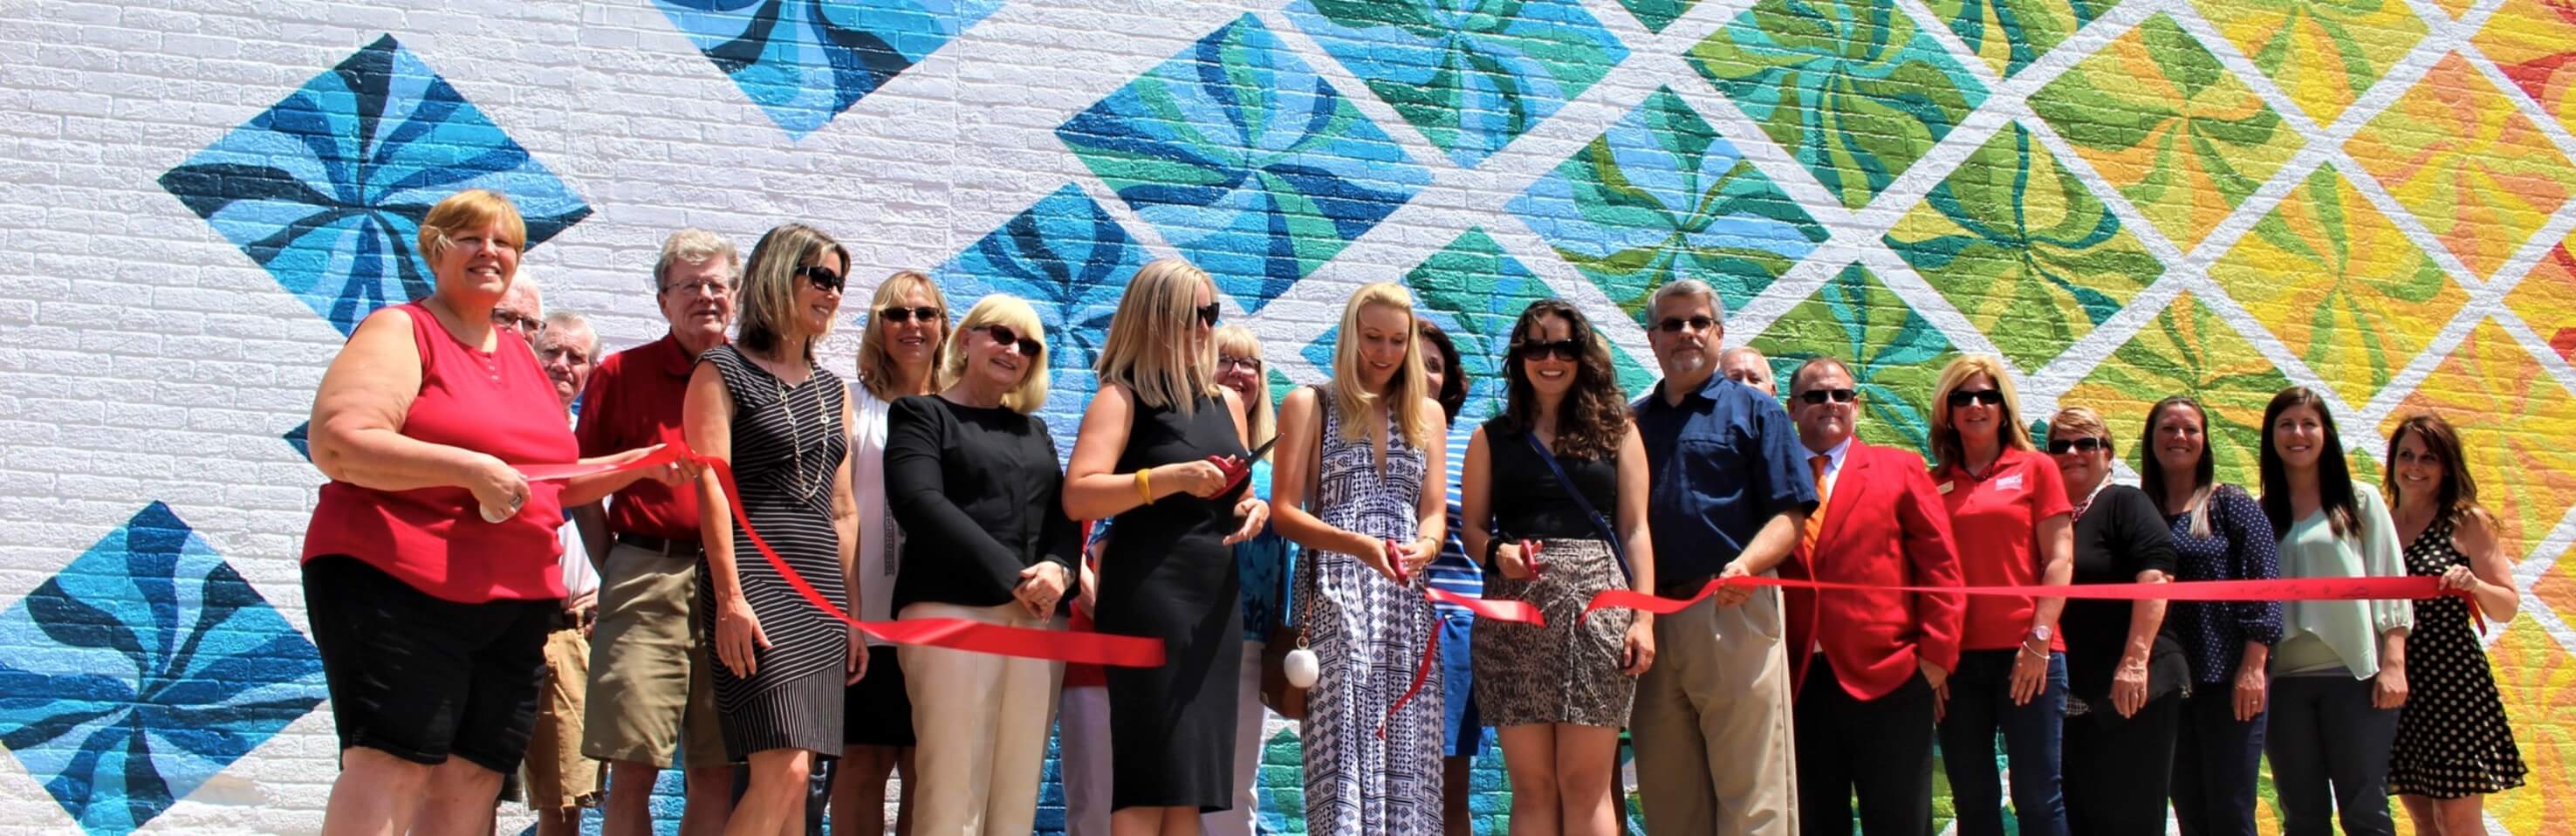 Group cutting ribbon in front of large mural painting